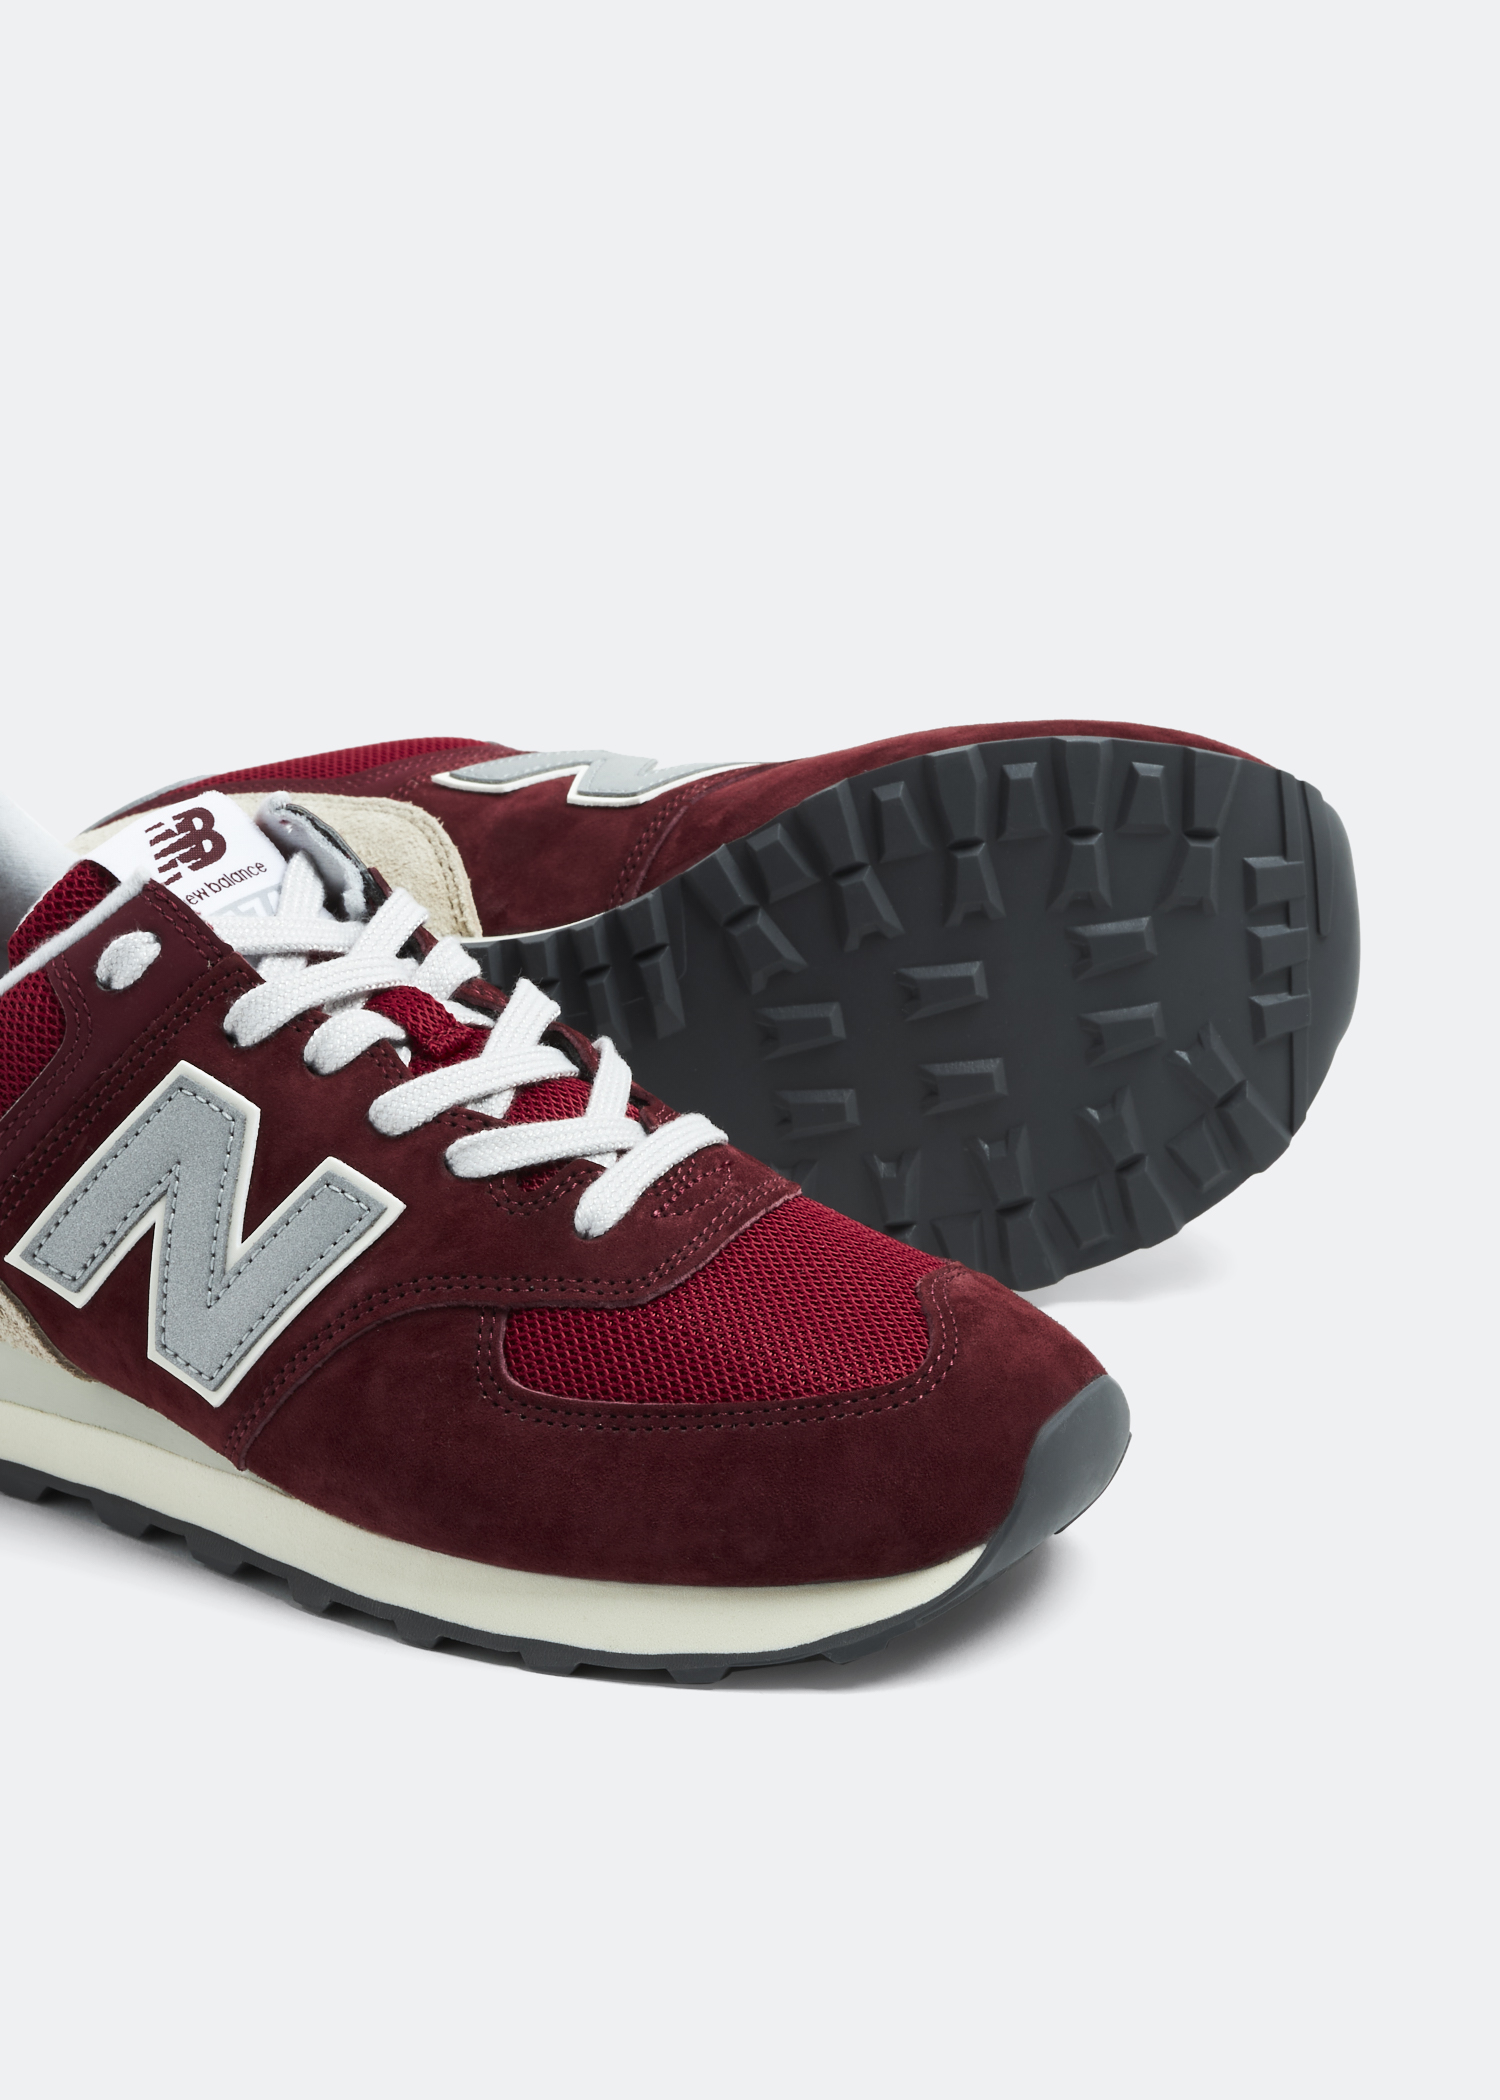 New Balance x Lunar New Year 574 sneakers for Men - Red in UAE